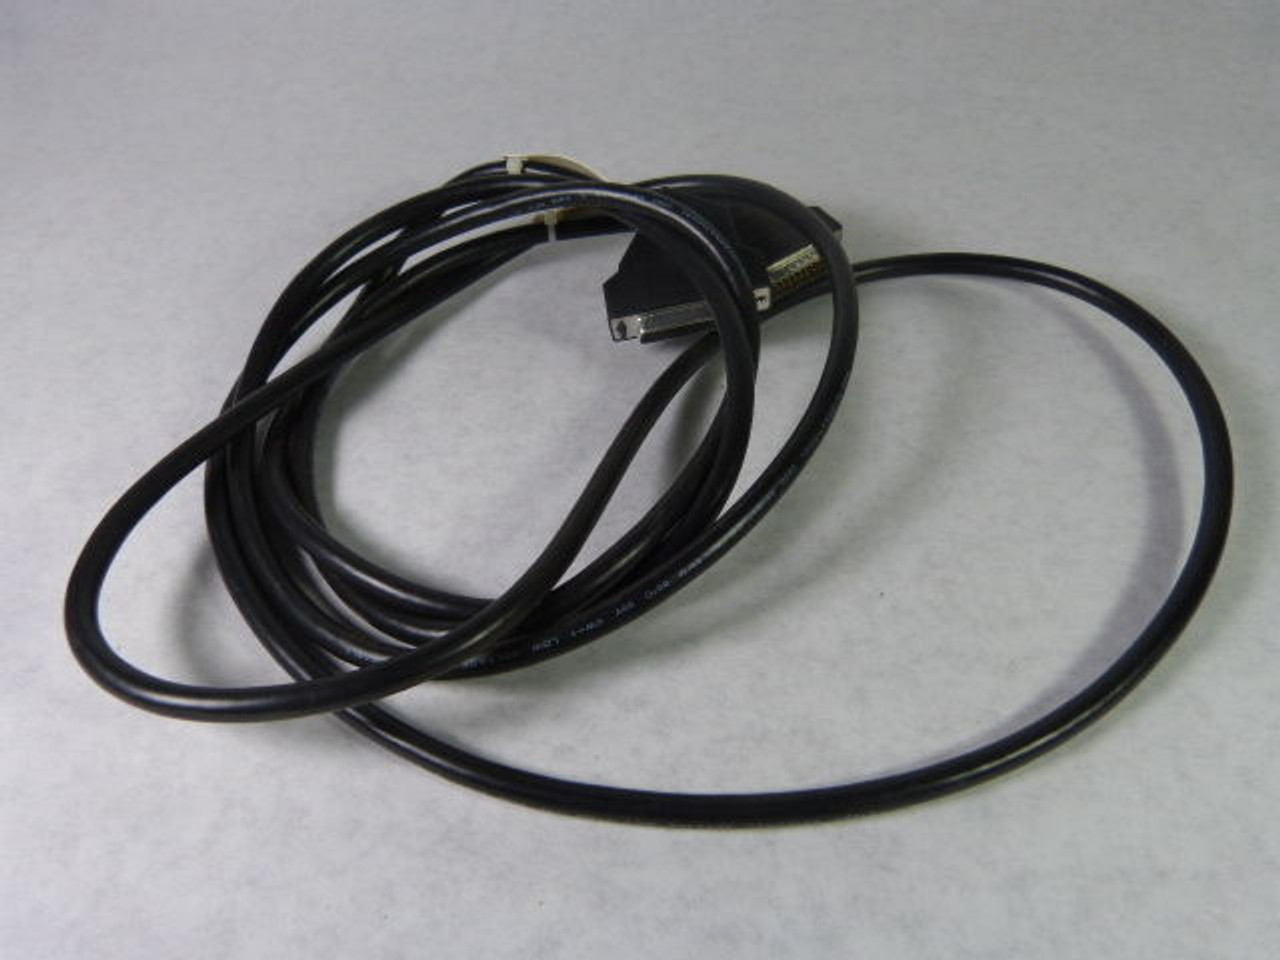 Pan International CBL-14080 Low Voltage Computer Cable E87647-DG USED